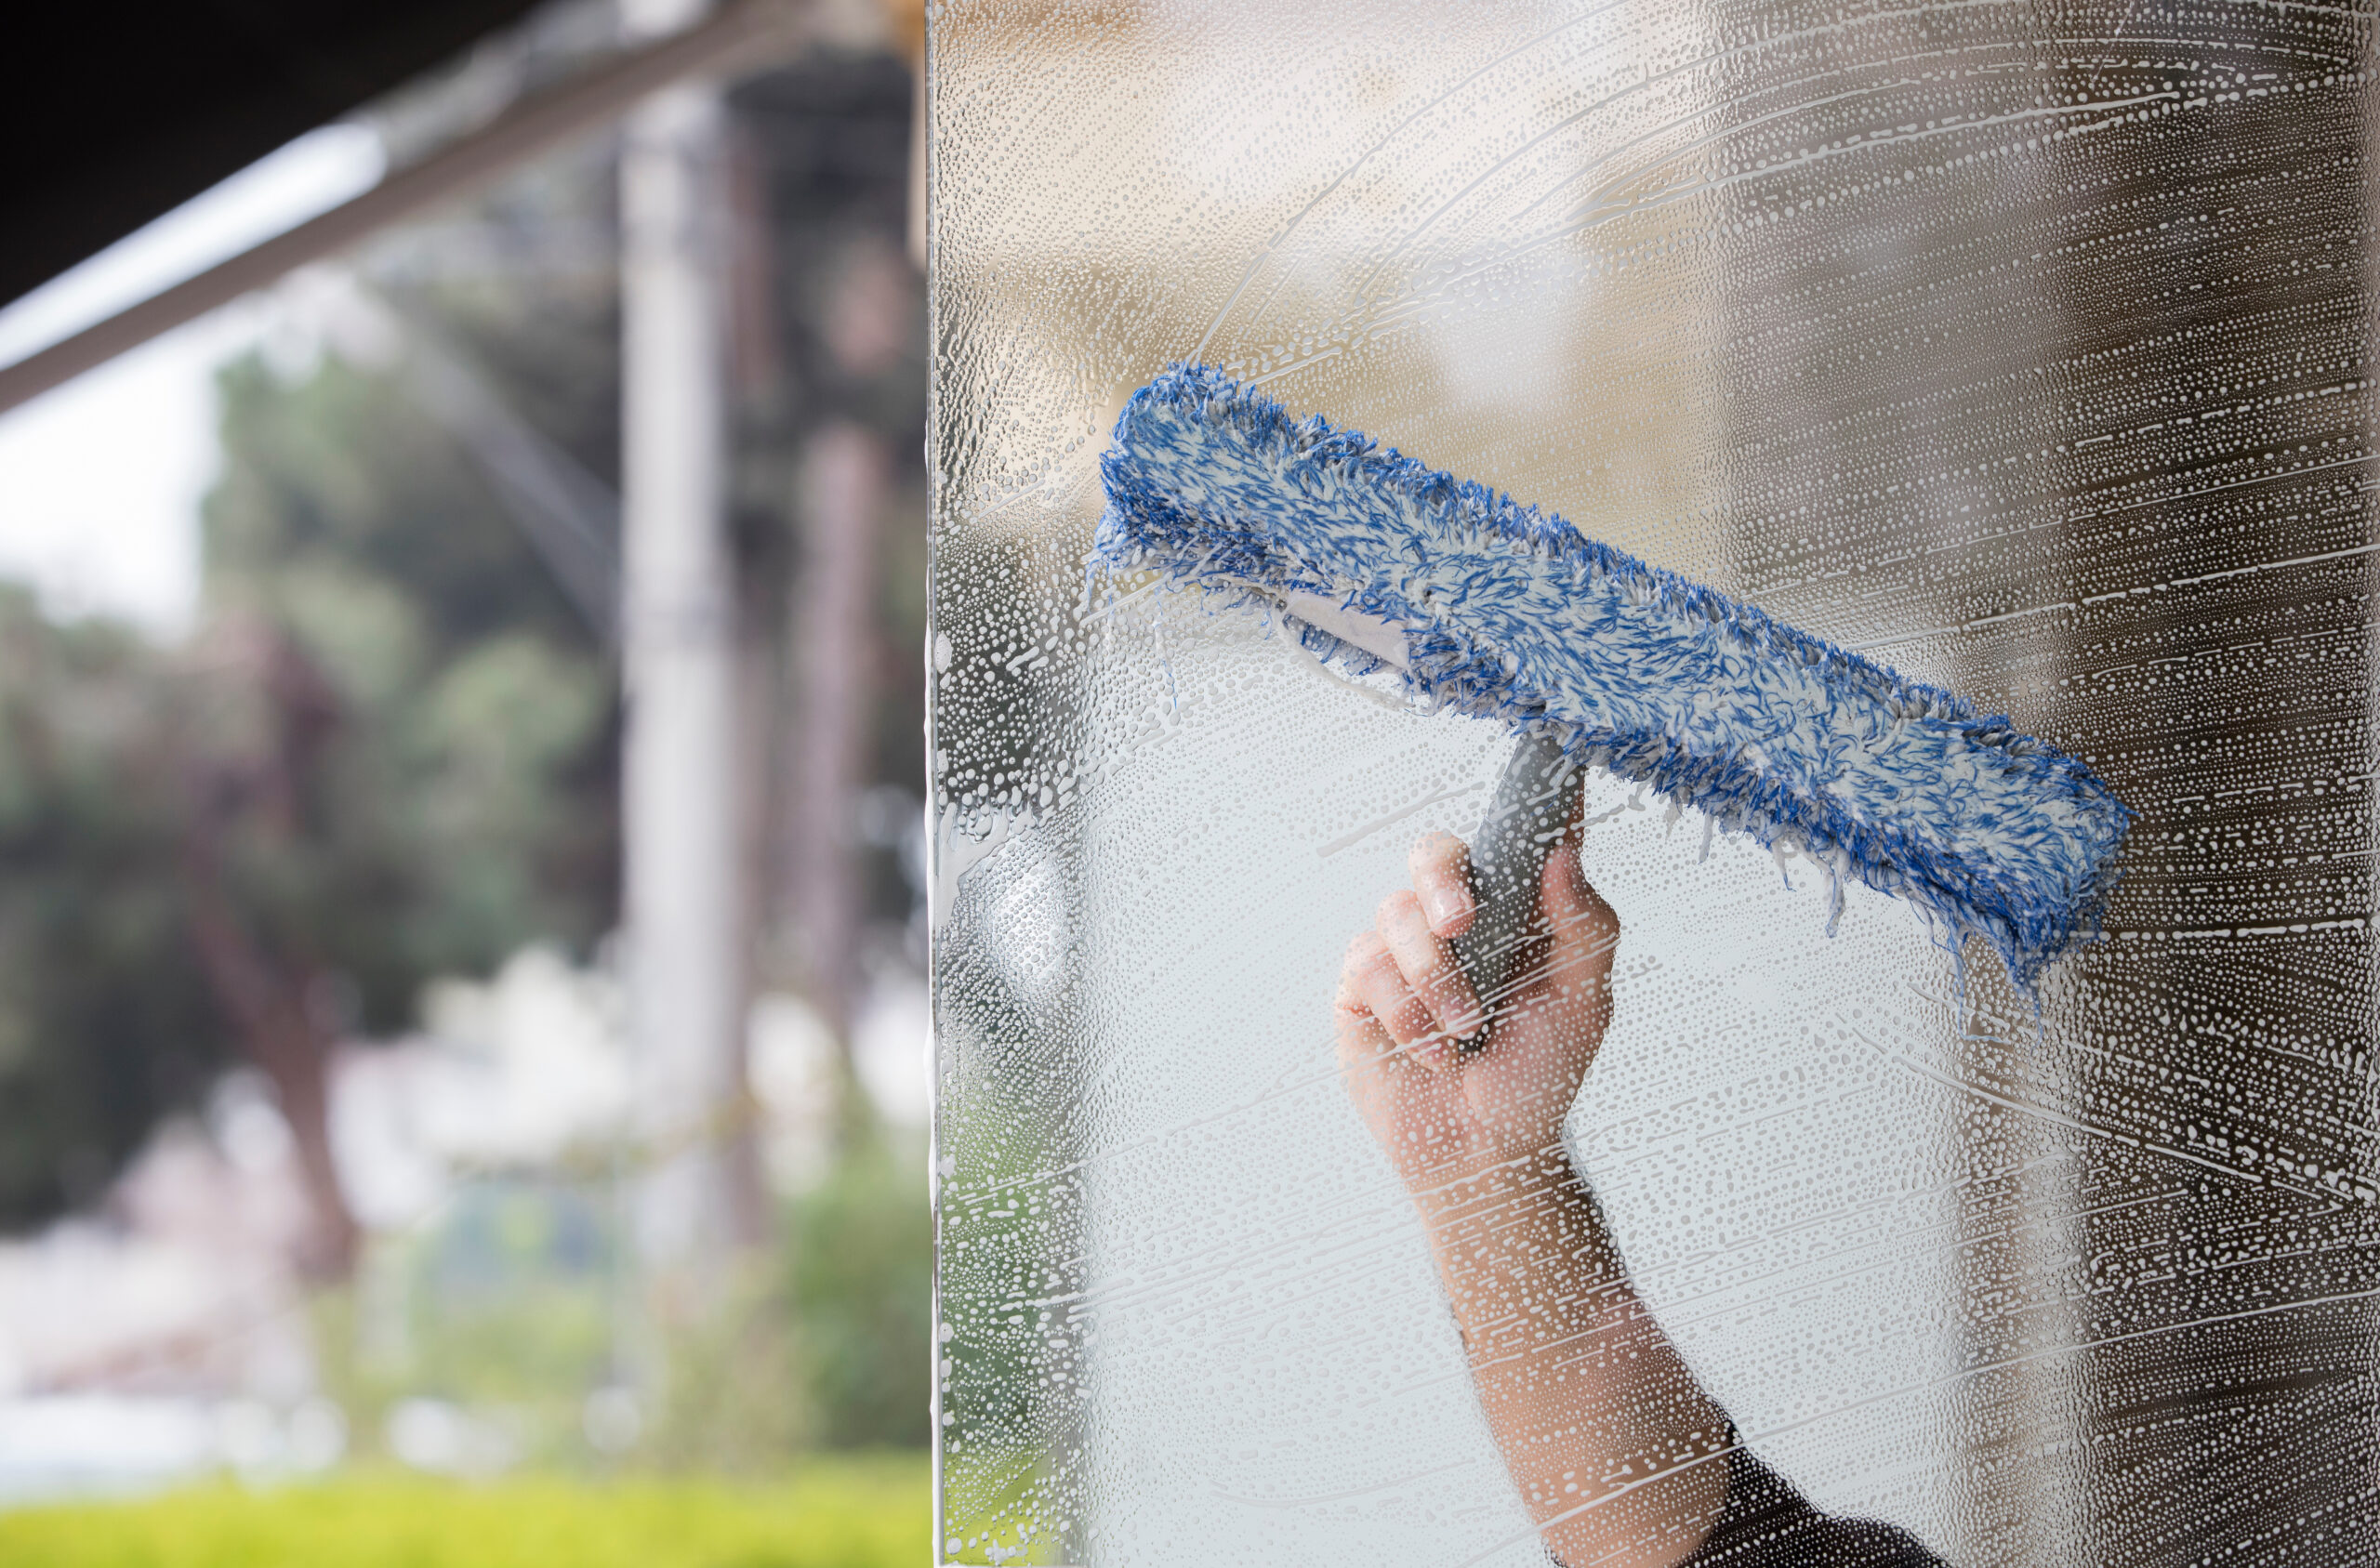 A person cleaning windows with a blue mop.